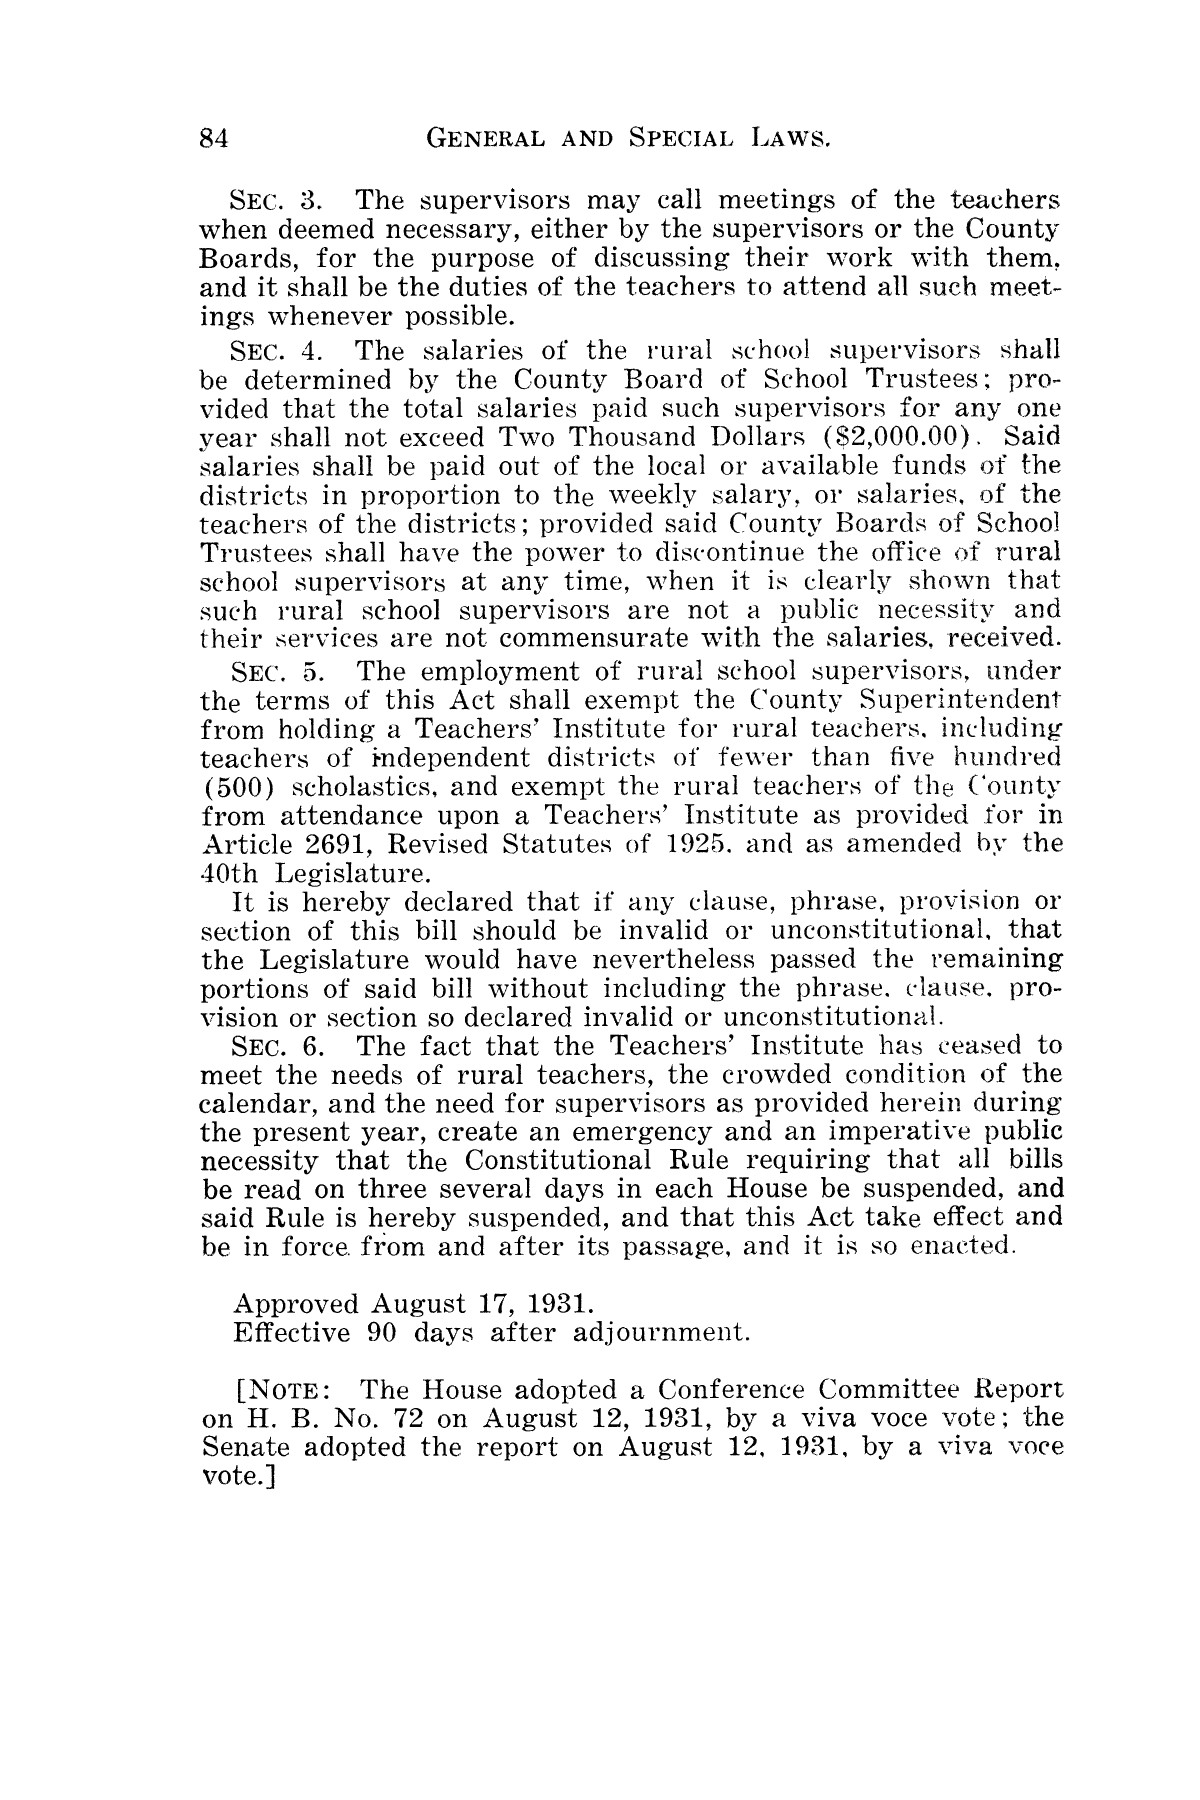 The Laws of Texas, 1931-1933 [Volume 28]
                                                
                                                    [Sequence #]: 92 of 2111
                                                